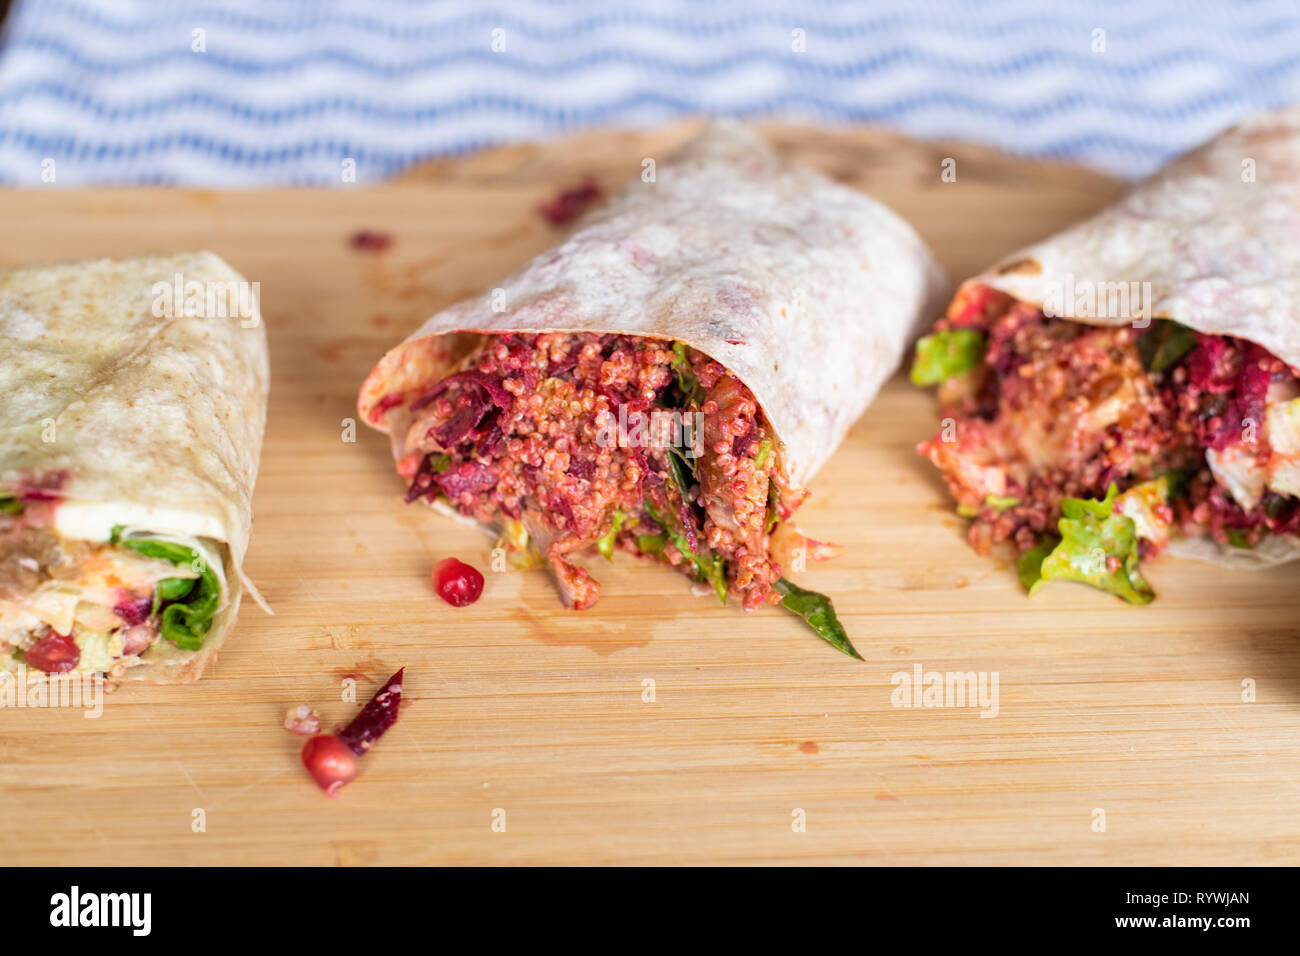 Organic Healthy Wraps with salad, quinoa, grilled chicken, red ...